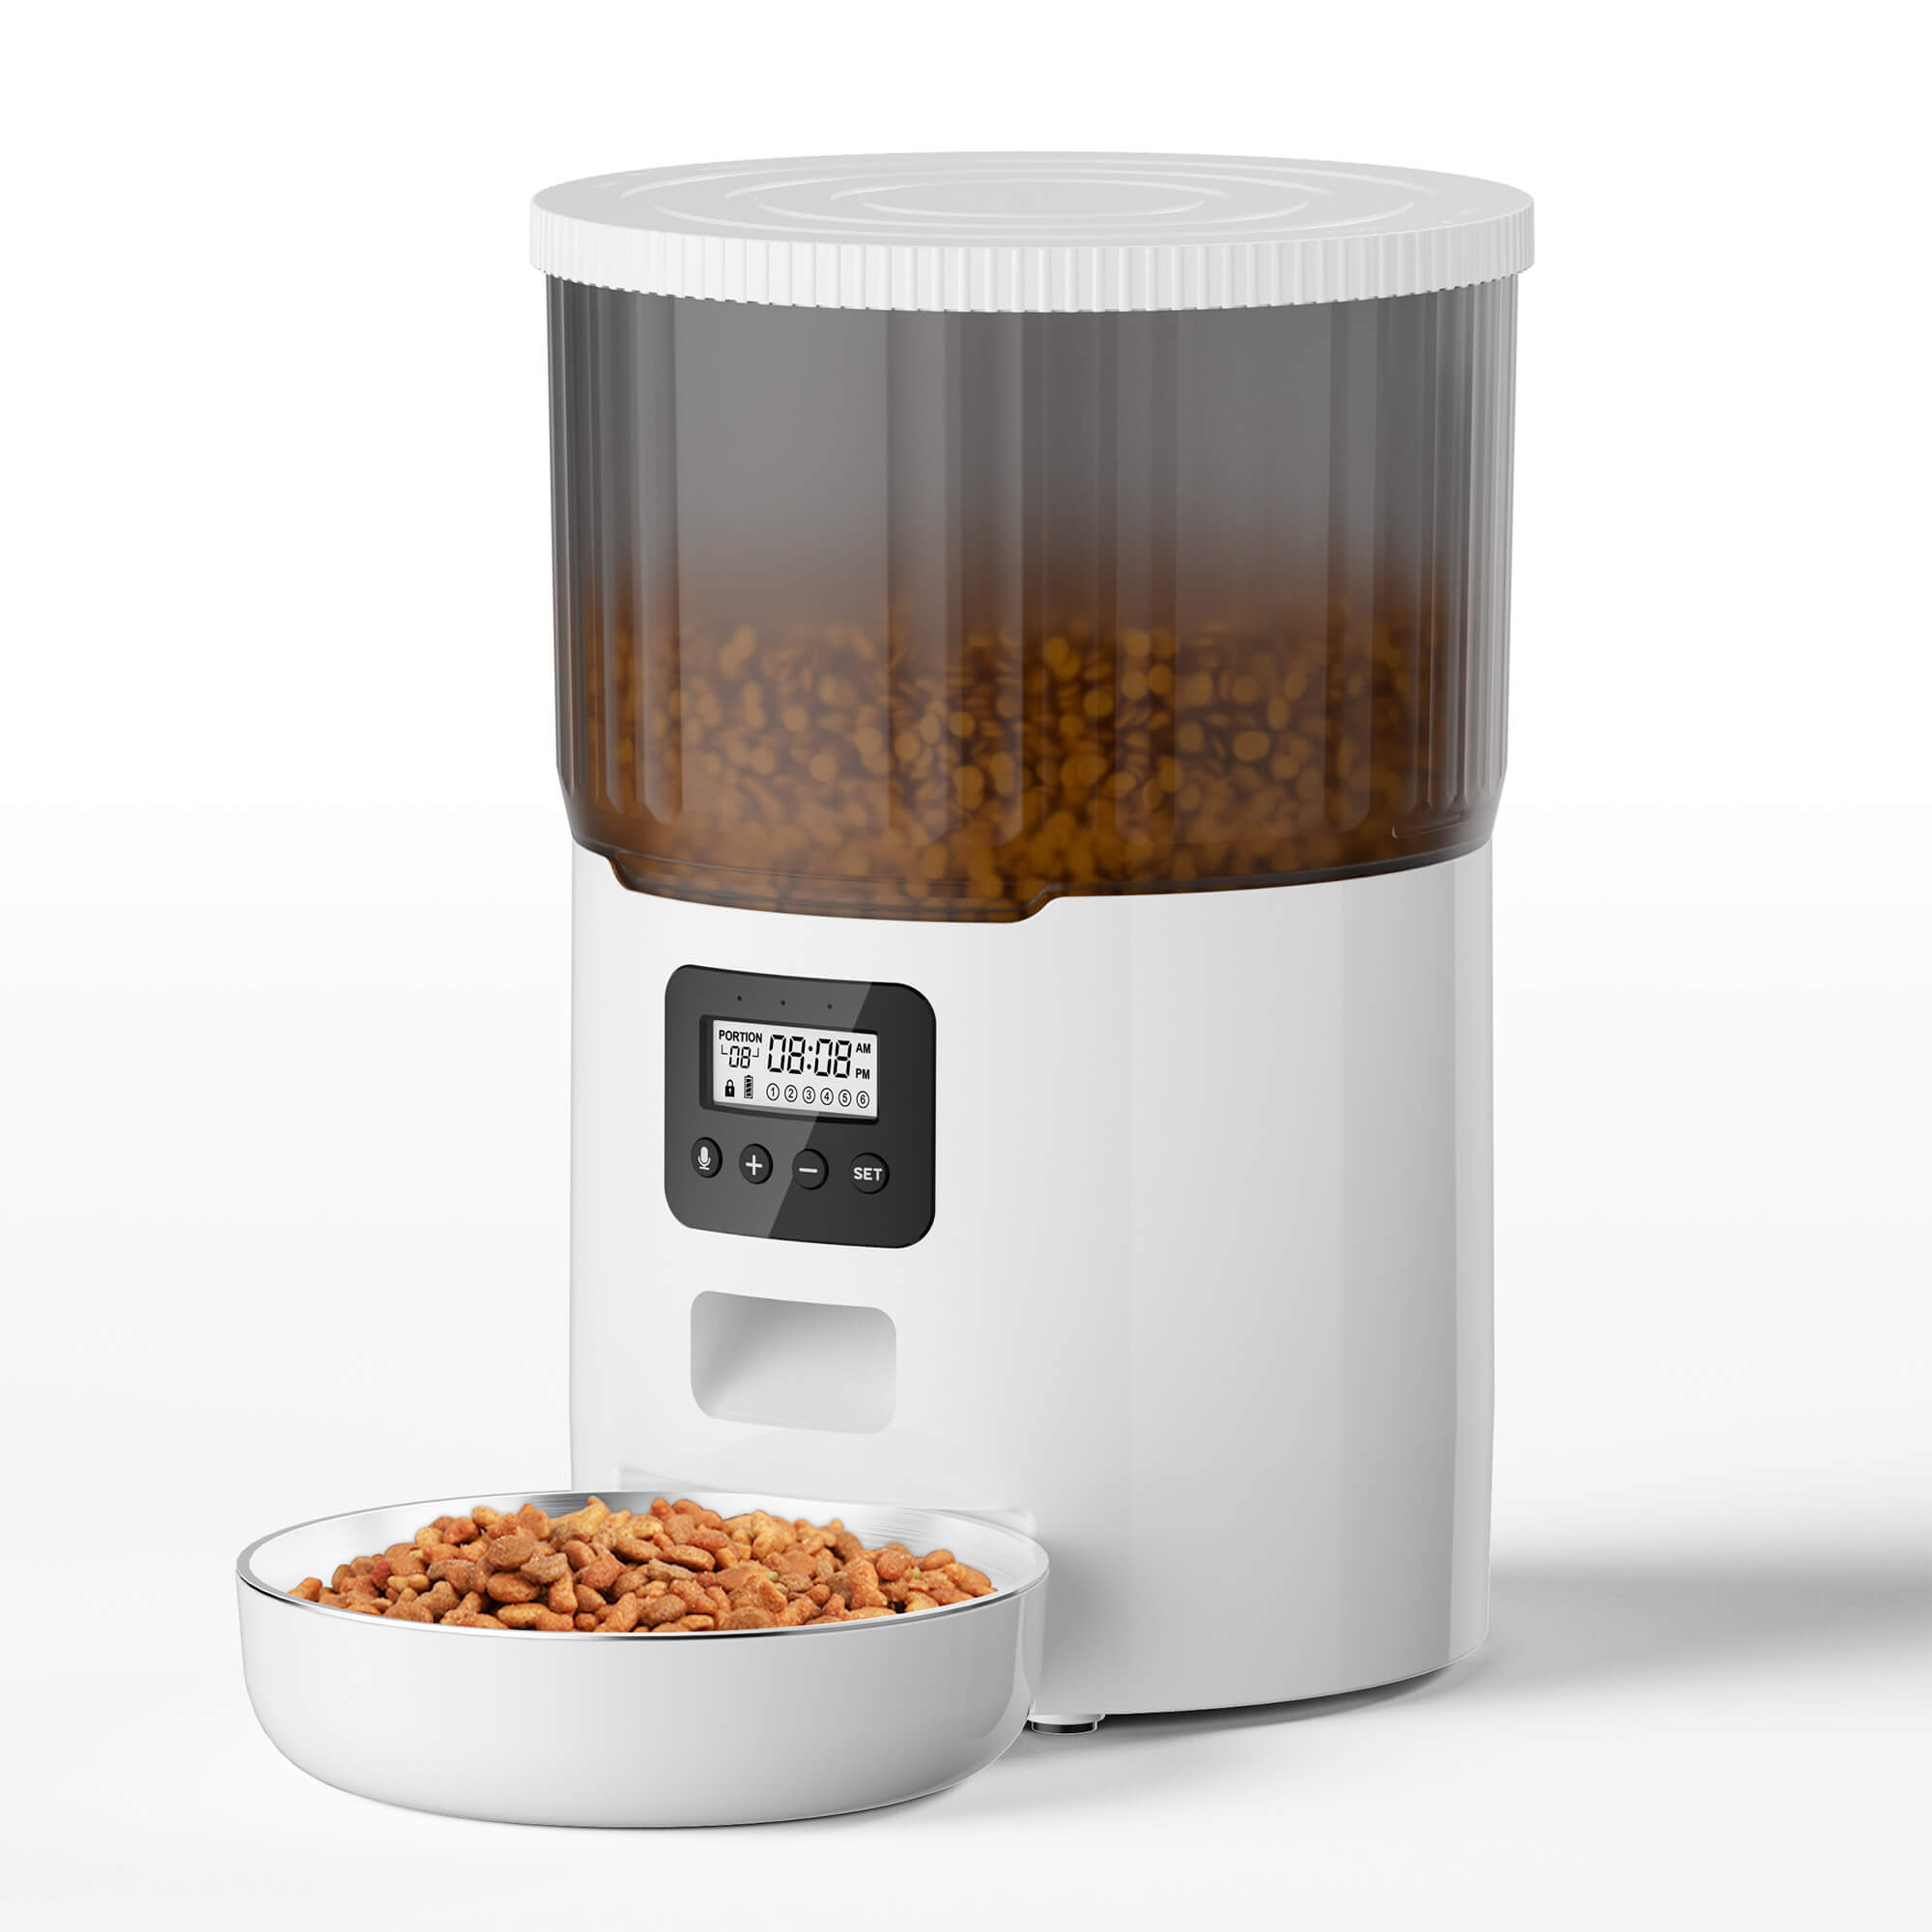 Best automatic dog feeders 2023: Easy dog food dispensers for your